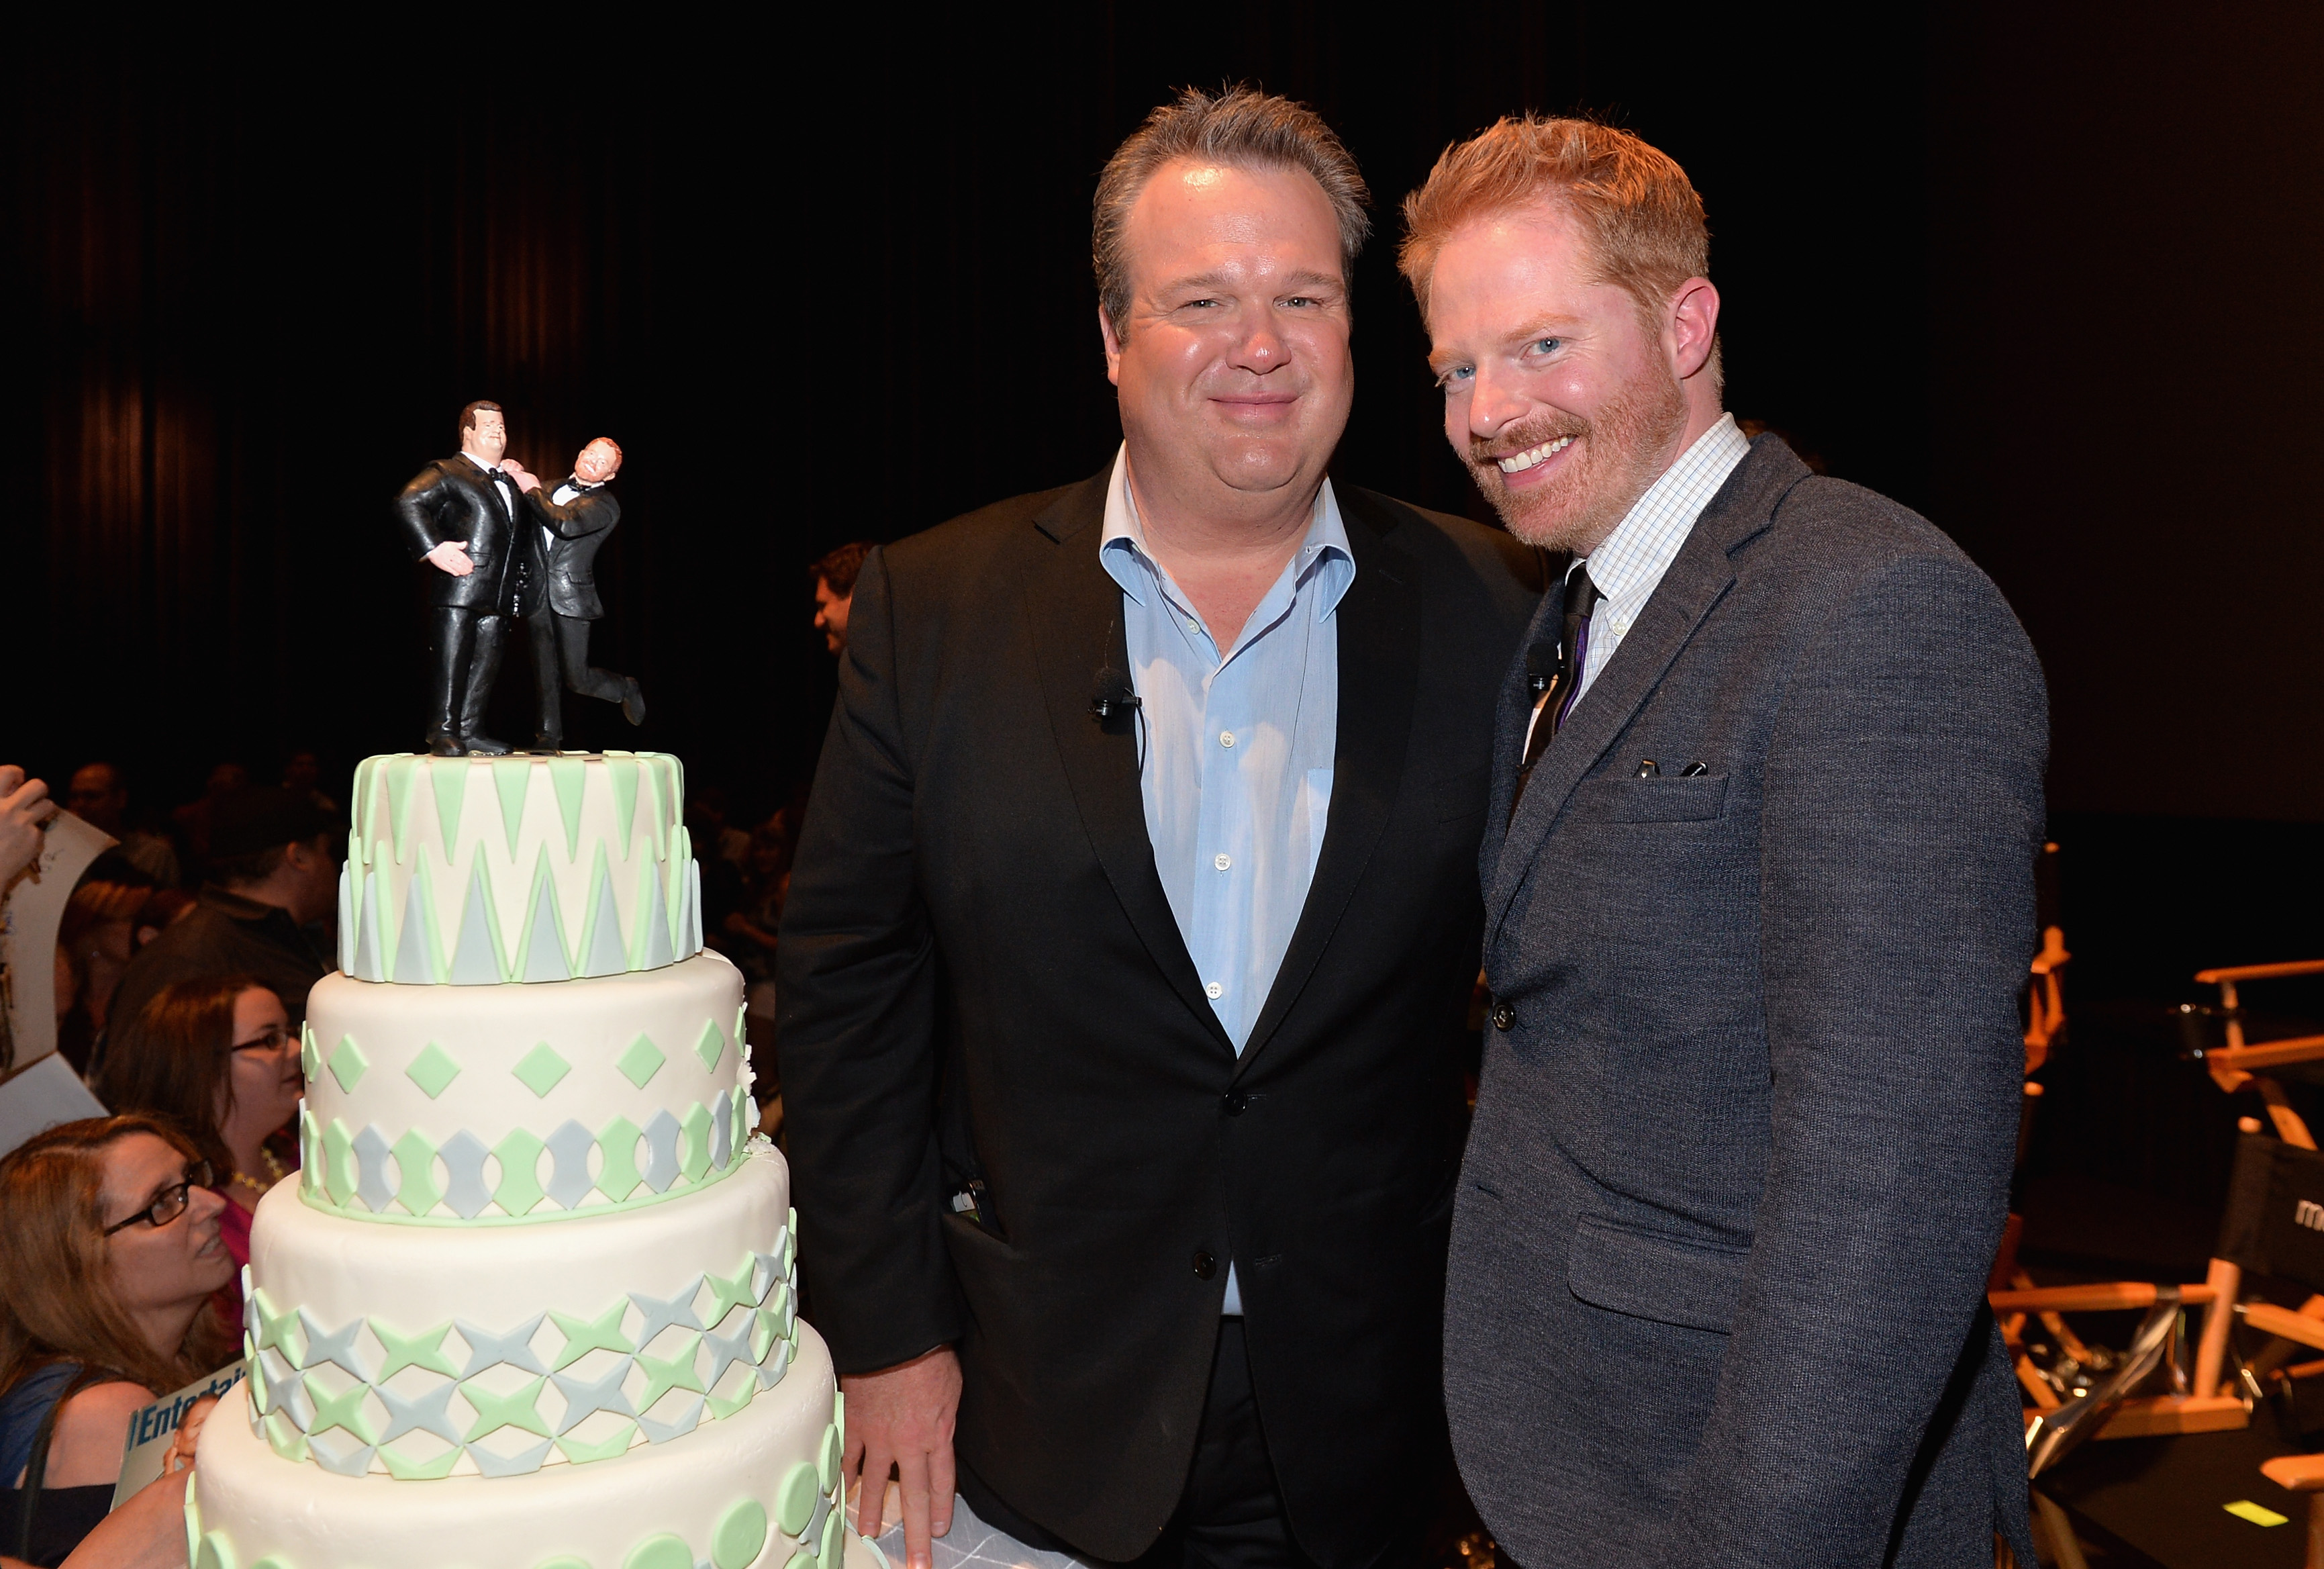 Actors Eric Stonestreet and Jesse Tyler Ferguson attend a "Modern Family" Wedding episode screening at Zanuck Theater at 20th Century Fox Lot on May 19, 2014 in Los Angeles, California. (Alberto E. Rodriguez&mdash;Getty Images)